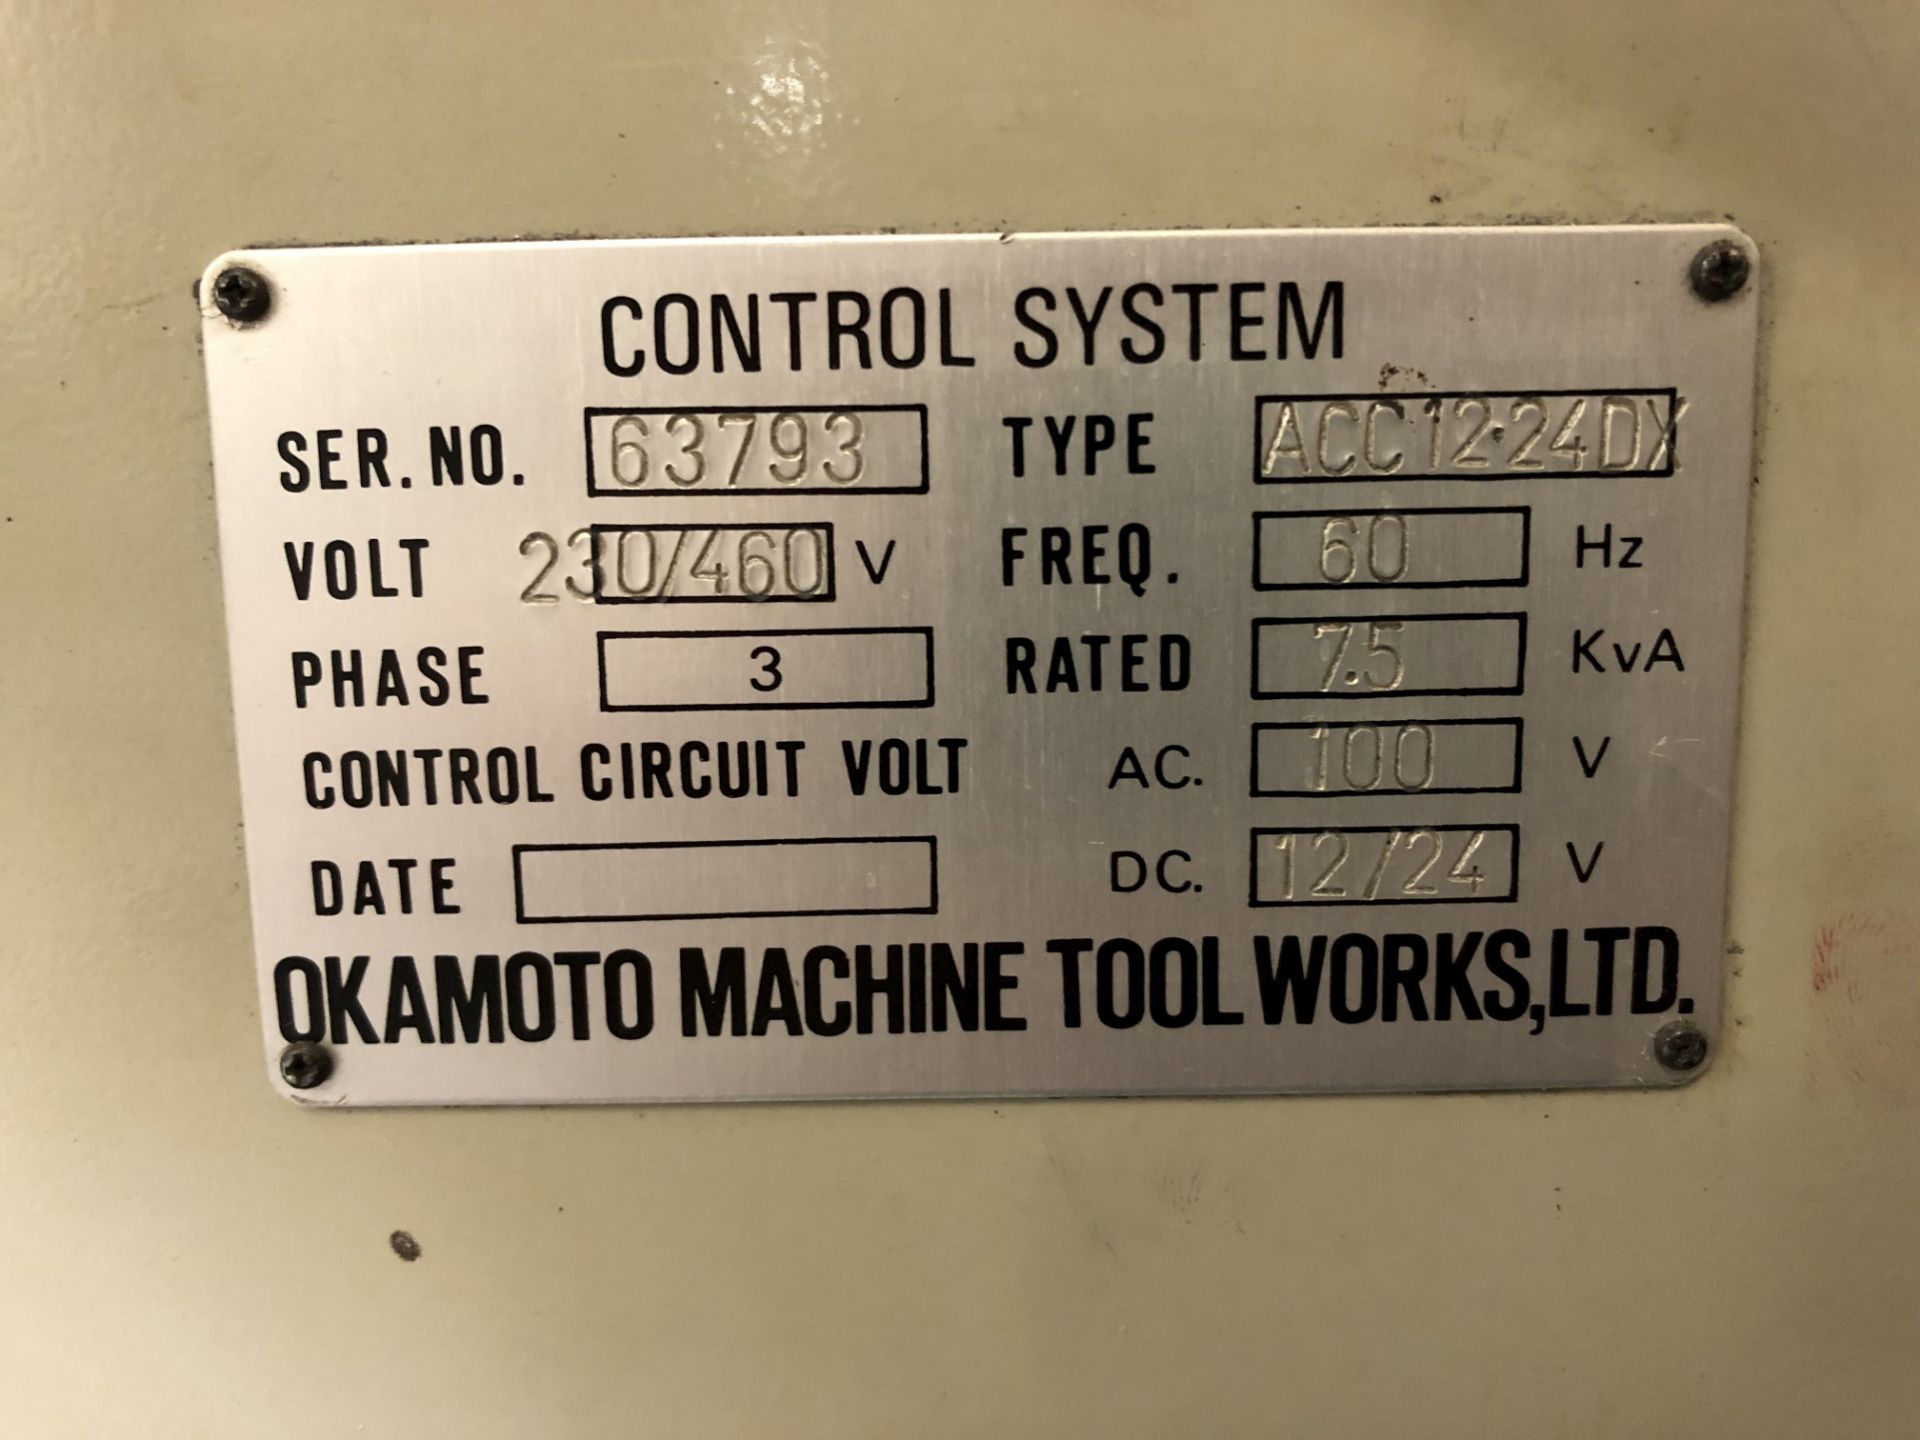 Okamoto ACC-12-24DX Surface Grinder, 12" x 24" Electro Magnetic Chuck, S/N 63793 (SPT #21) - Image 10 of 12